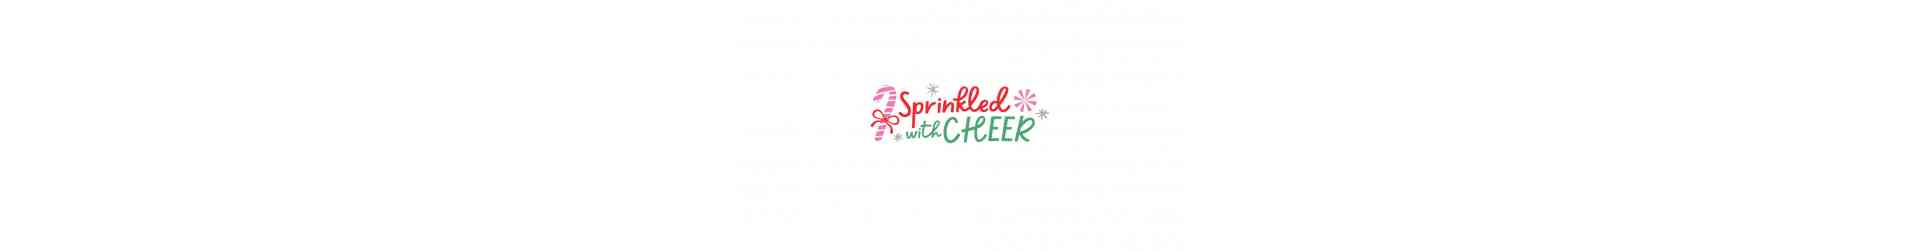 Sprinkled with cheer